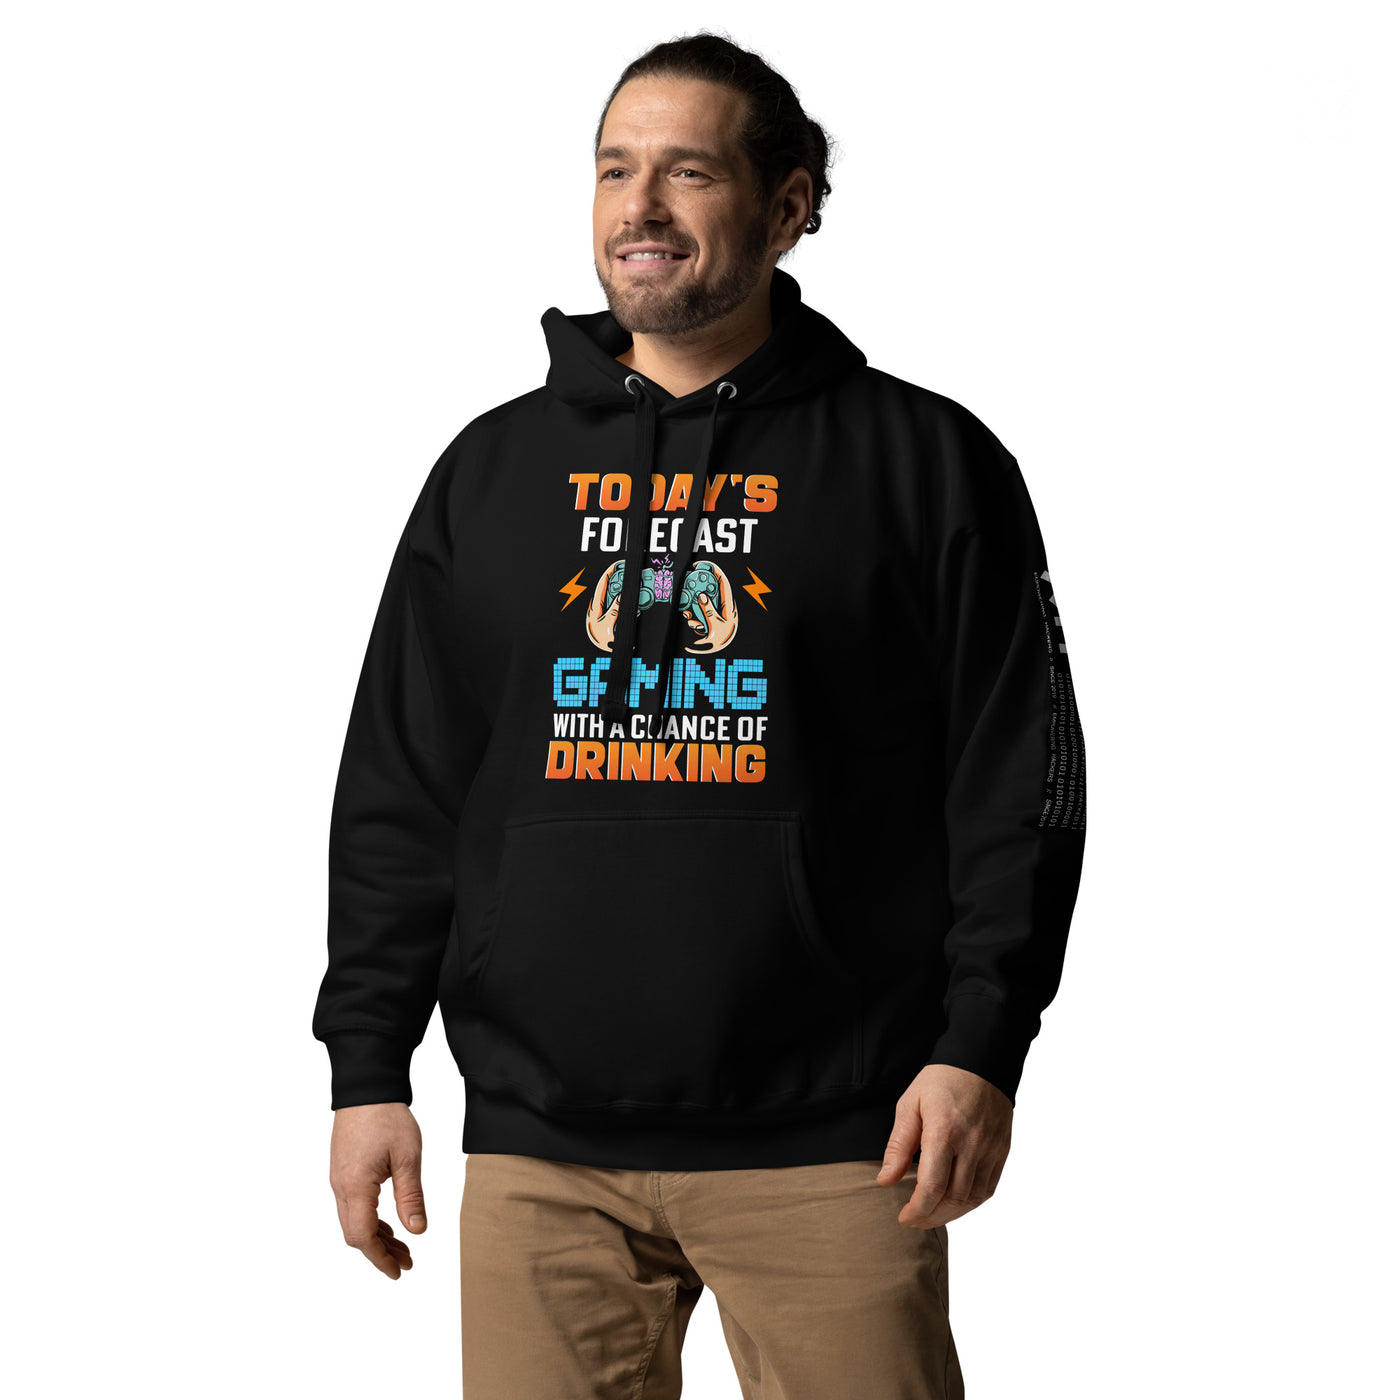 Games: the Only legal place to Kill Stupid People ( orange text ) - Unisex Hoodie